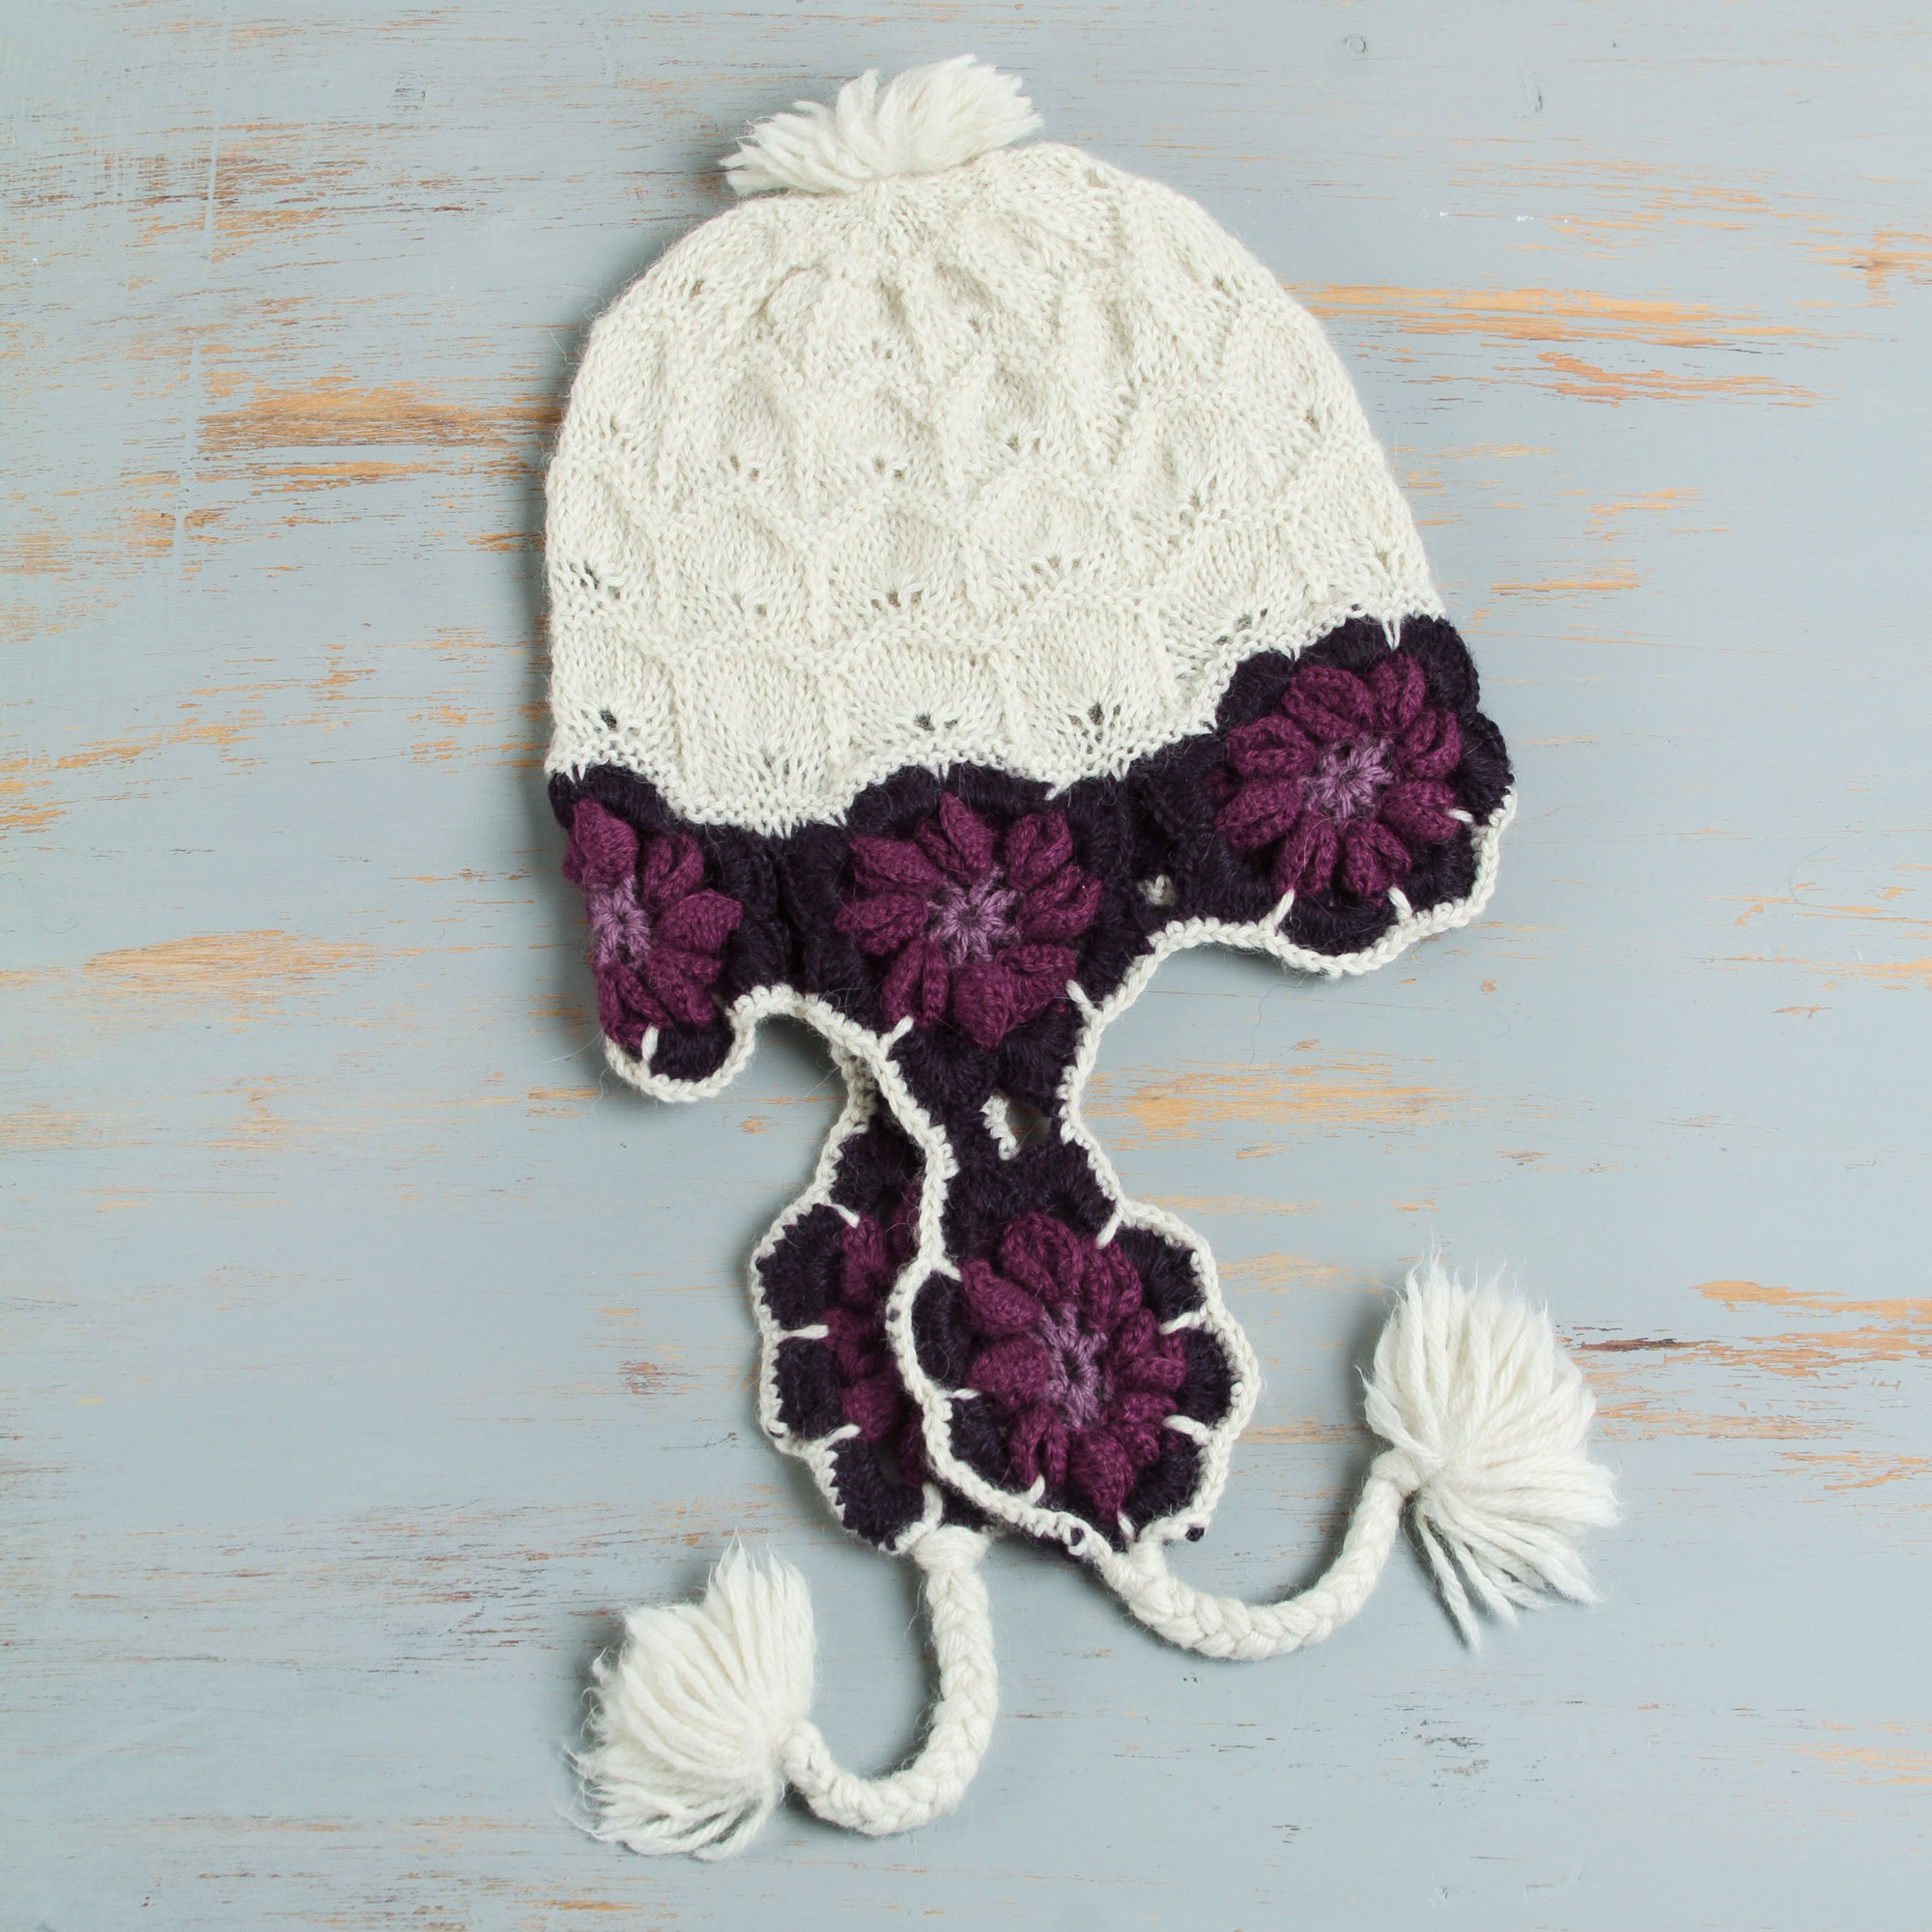 Alpaca Hand Knitted Chullo Style Hat in Ivory and Purples, 'Orchid Surprise'